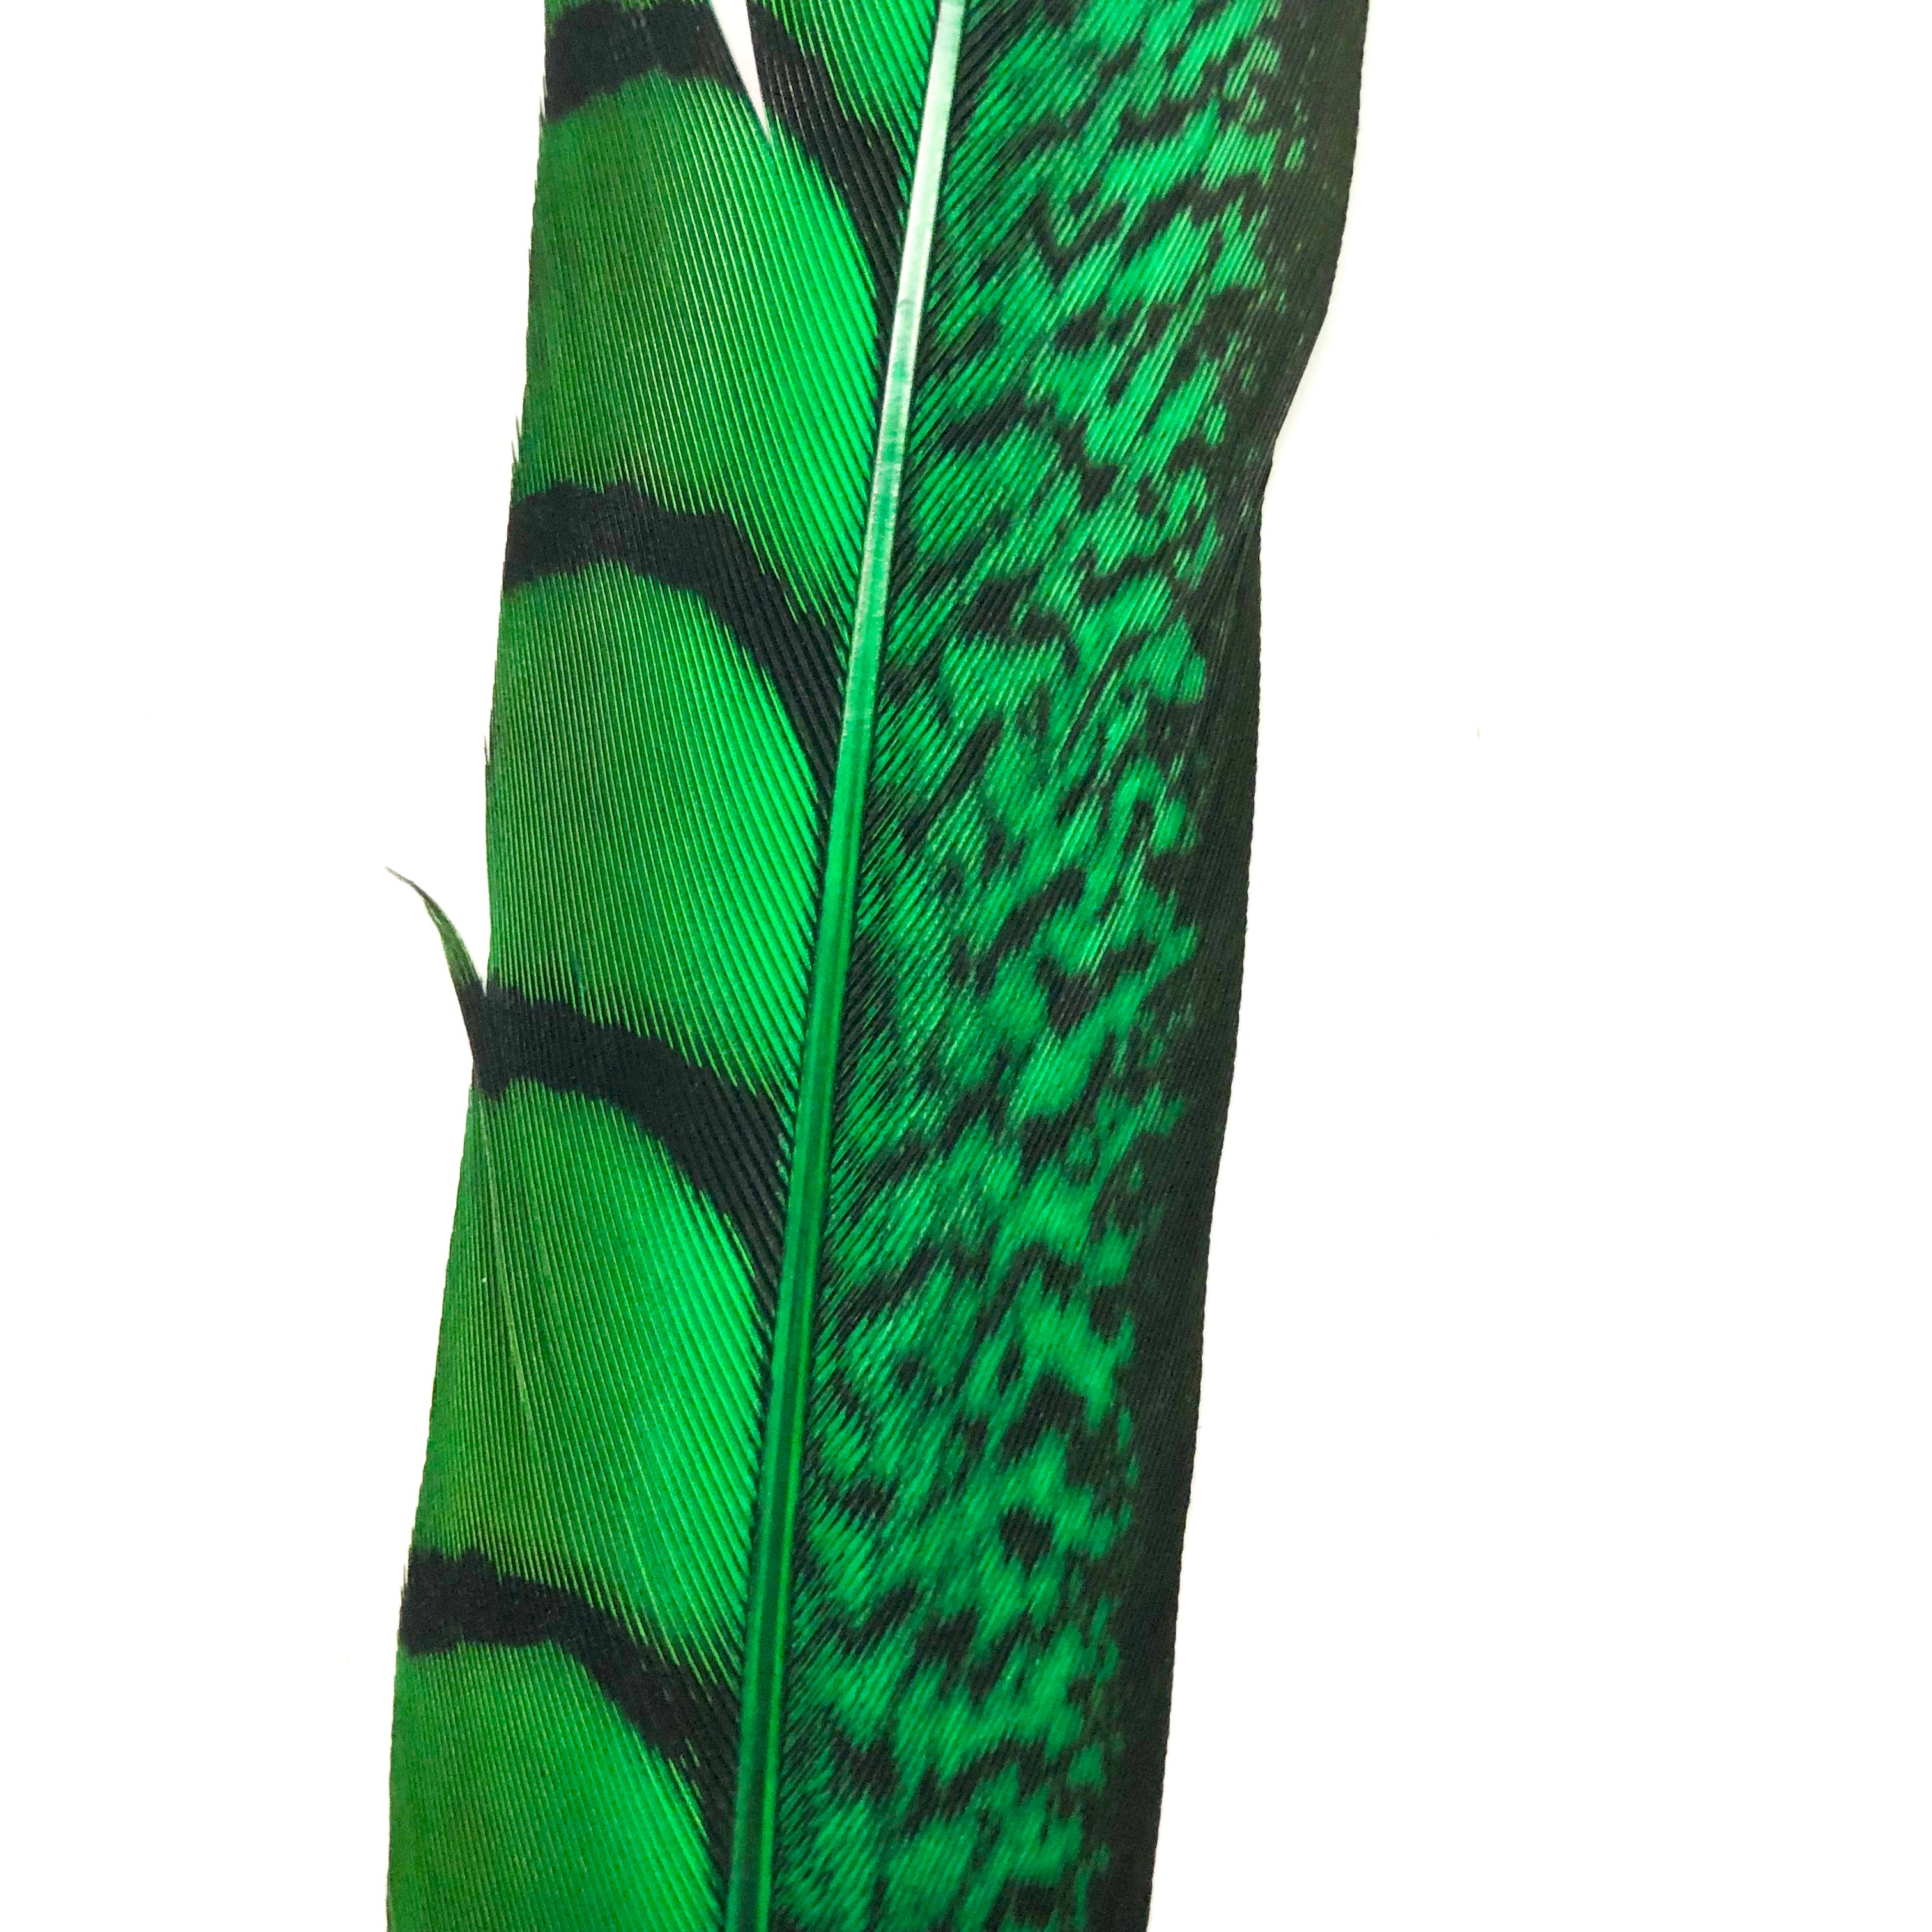 10" to 20" Lady Amherst Pheasant Side Tail Feather - Green